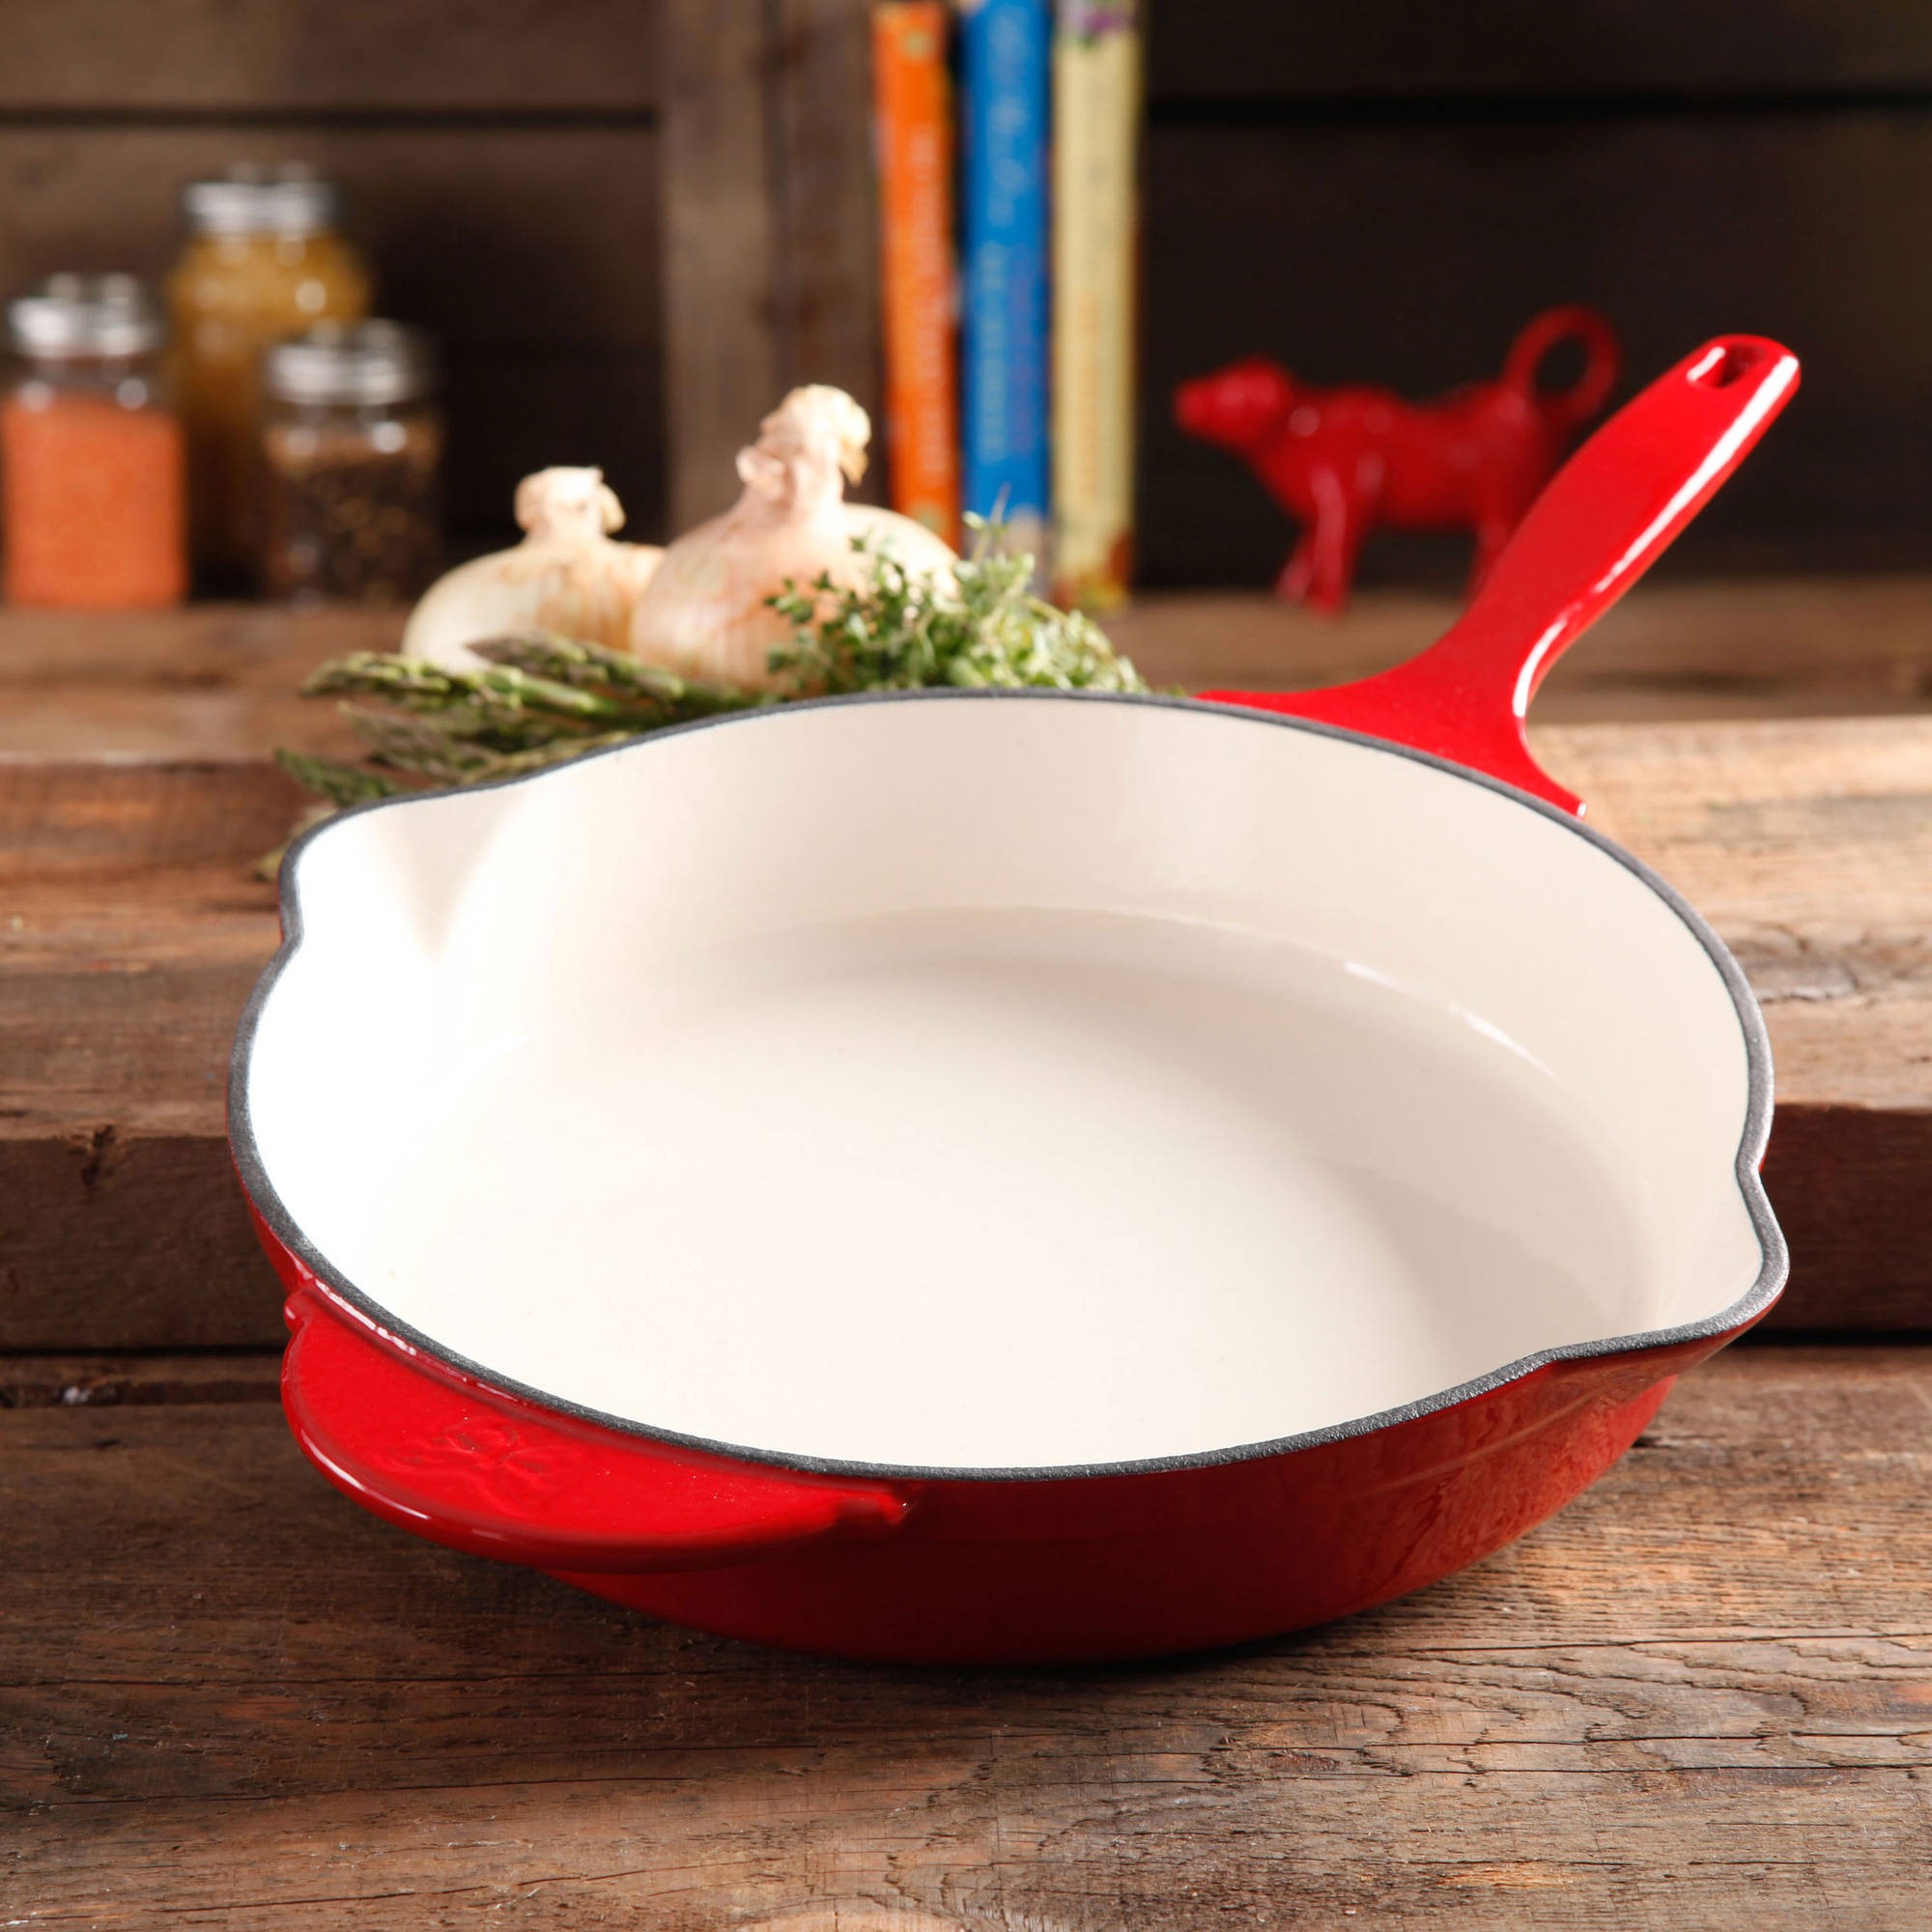 The Pioneer Woman Timeless Cast Iron, 12" Cast Iron Enamel Skillet - image 1 of 2